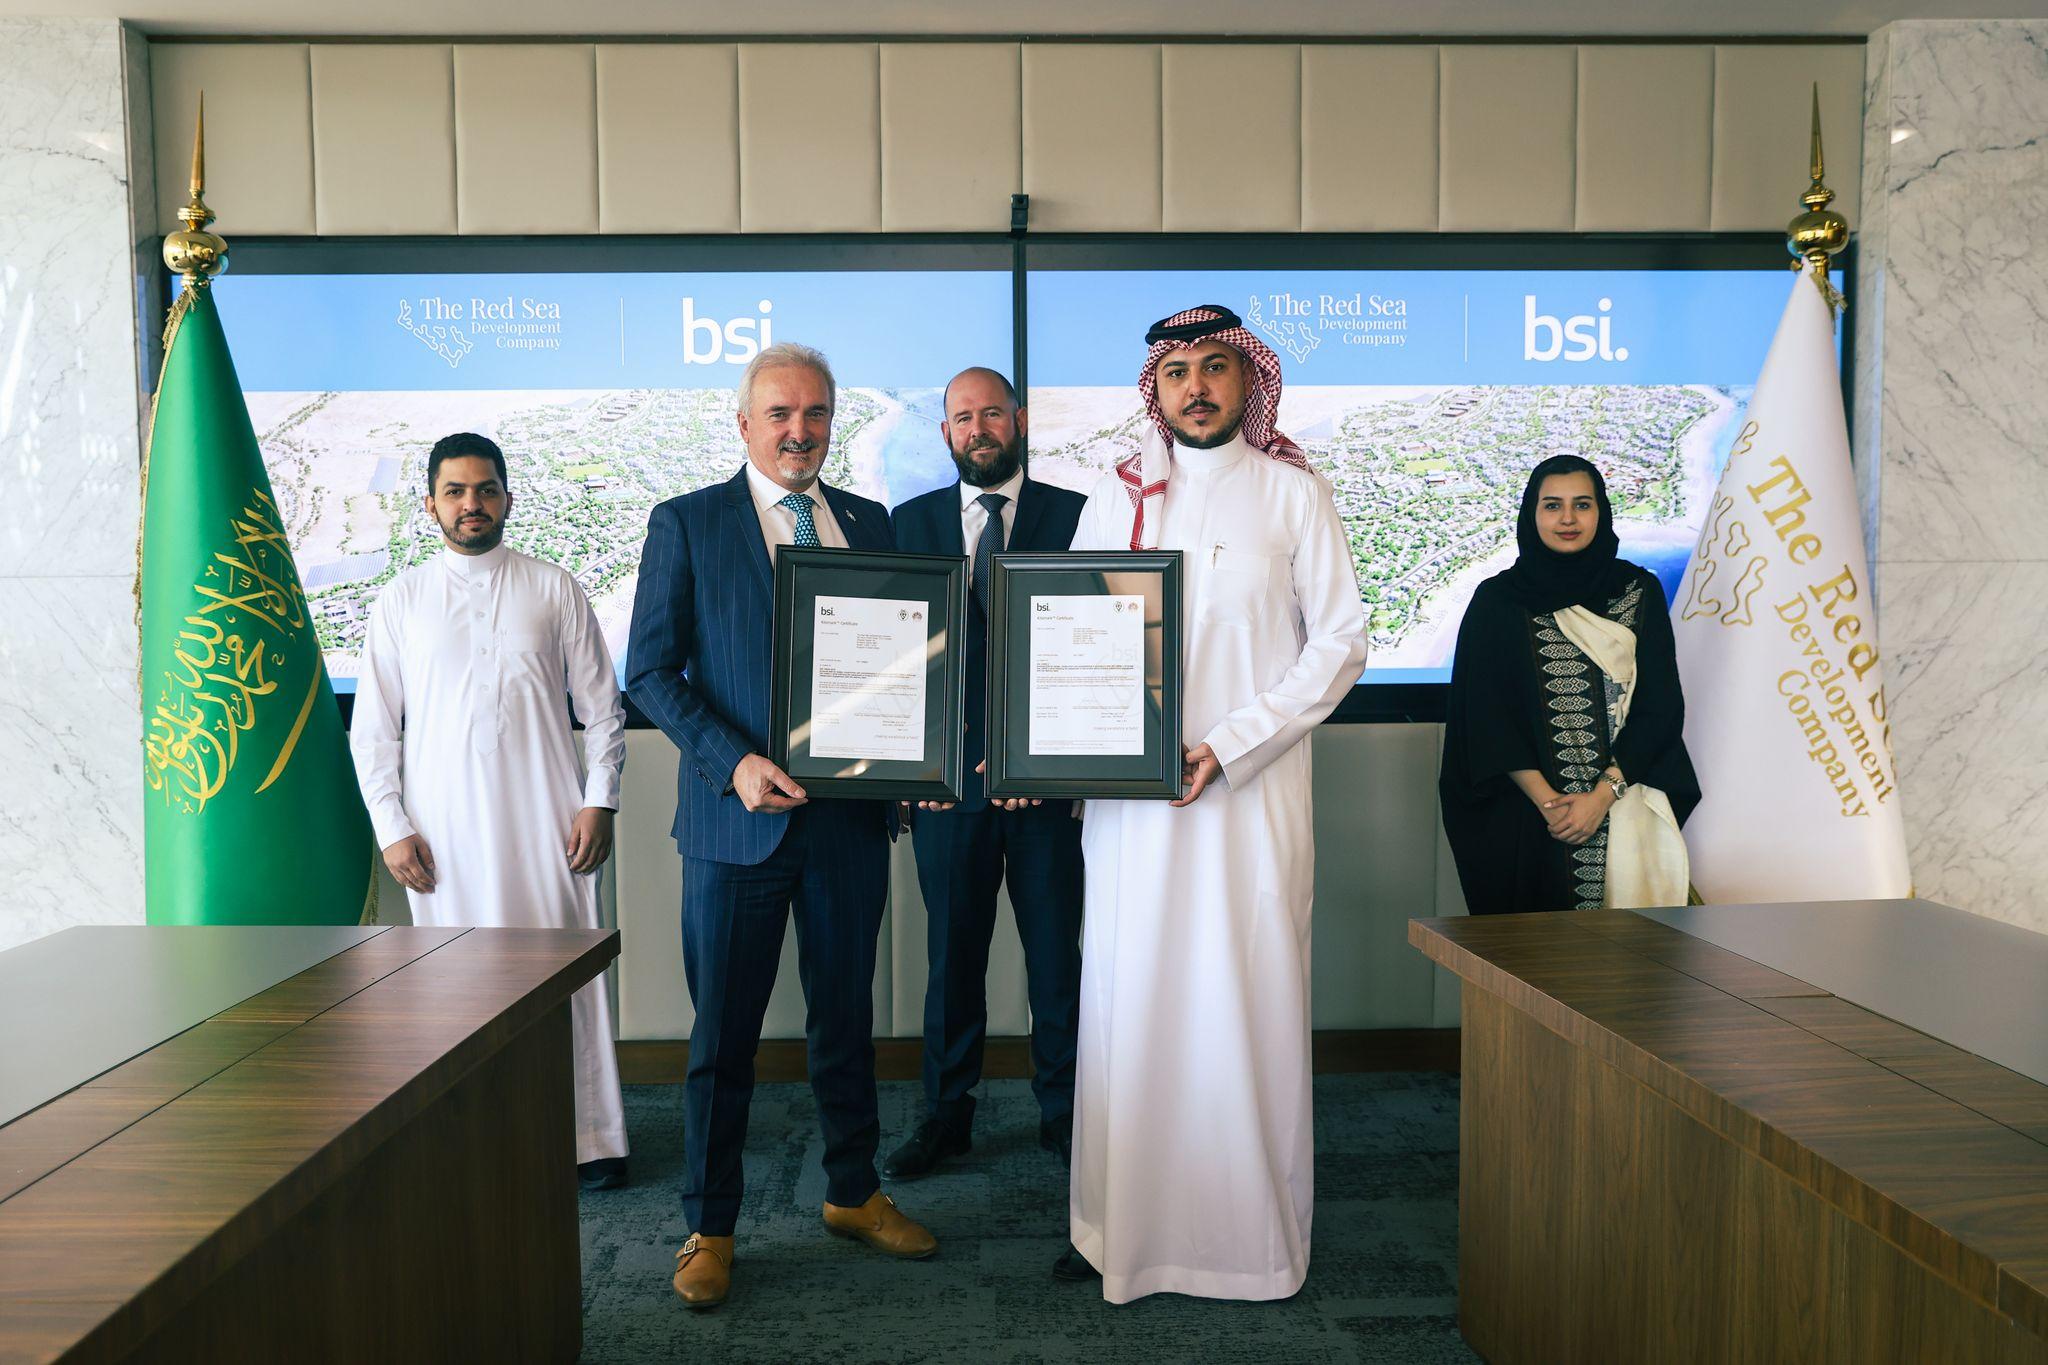 Red Sea Global becomes the first global asset owner in the world to achieve a BSI BIM Project Kitemark for digital project delivery